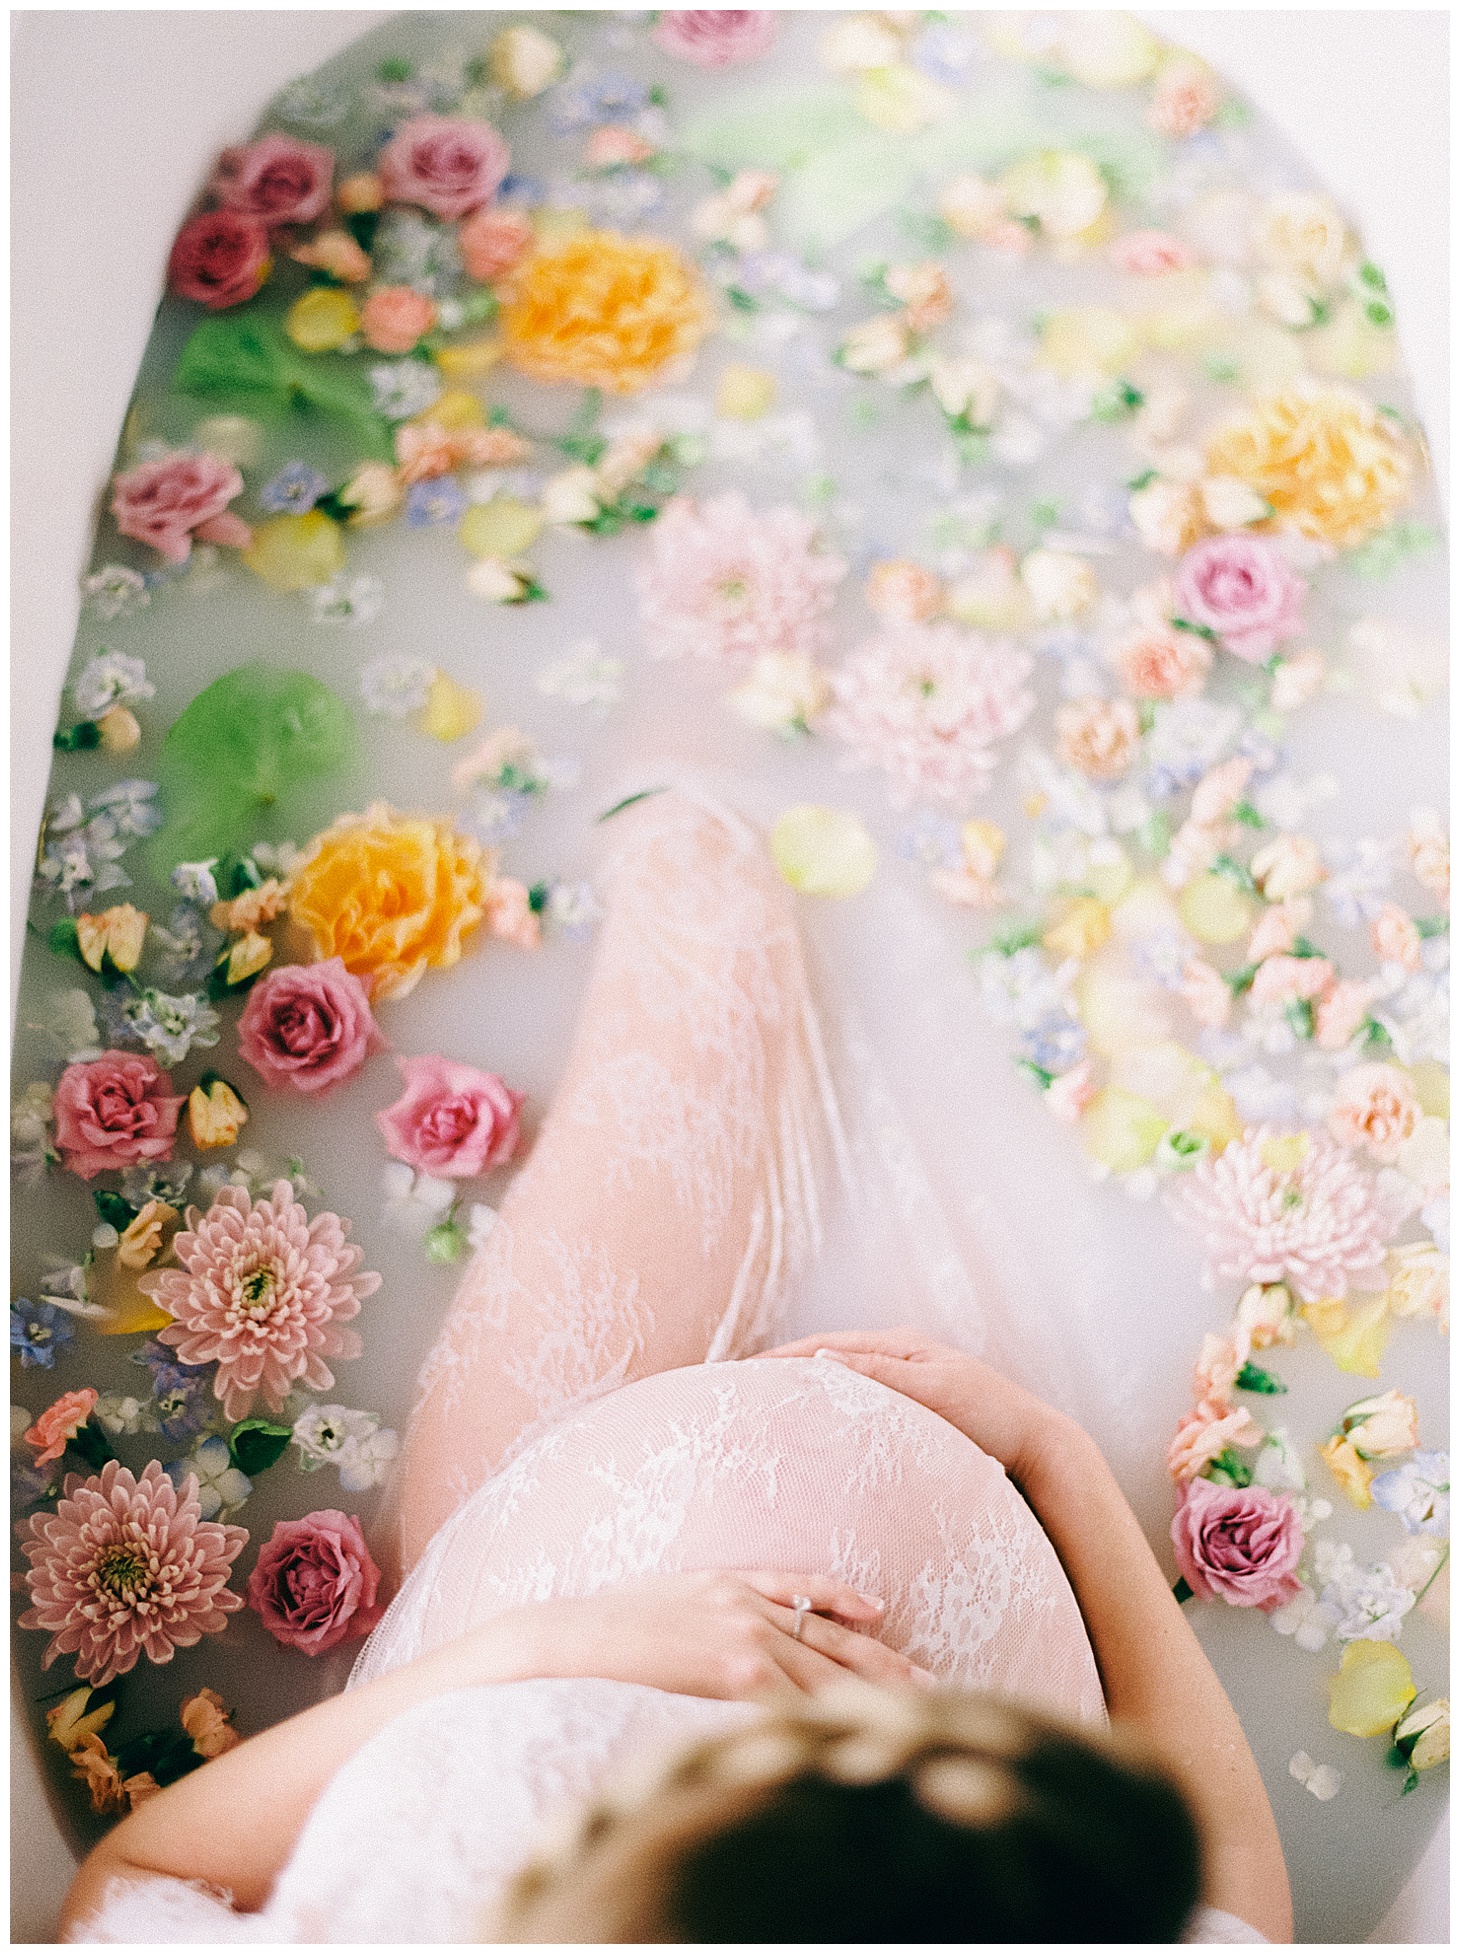 Ethereal Maternity Session, Floral Bath Maternity Session, Fine Art Maternity, Film Photography, Fine Art Film Photography, Nikki Santerre